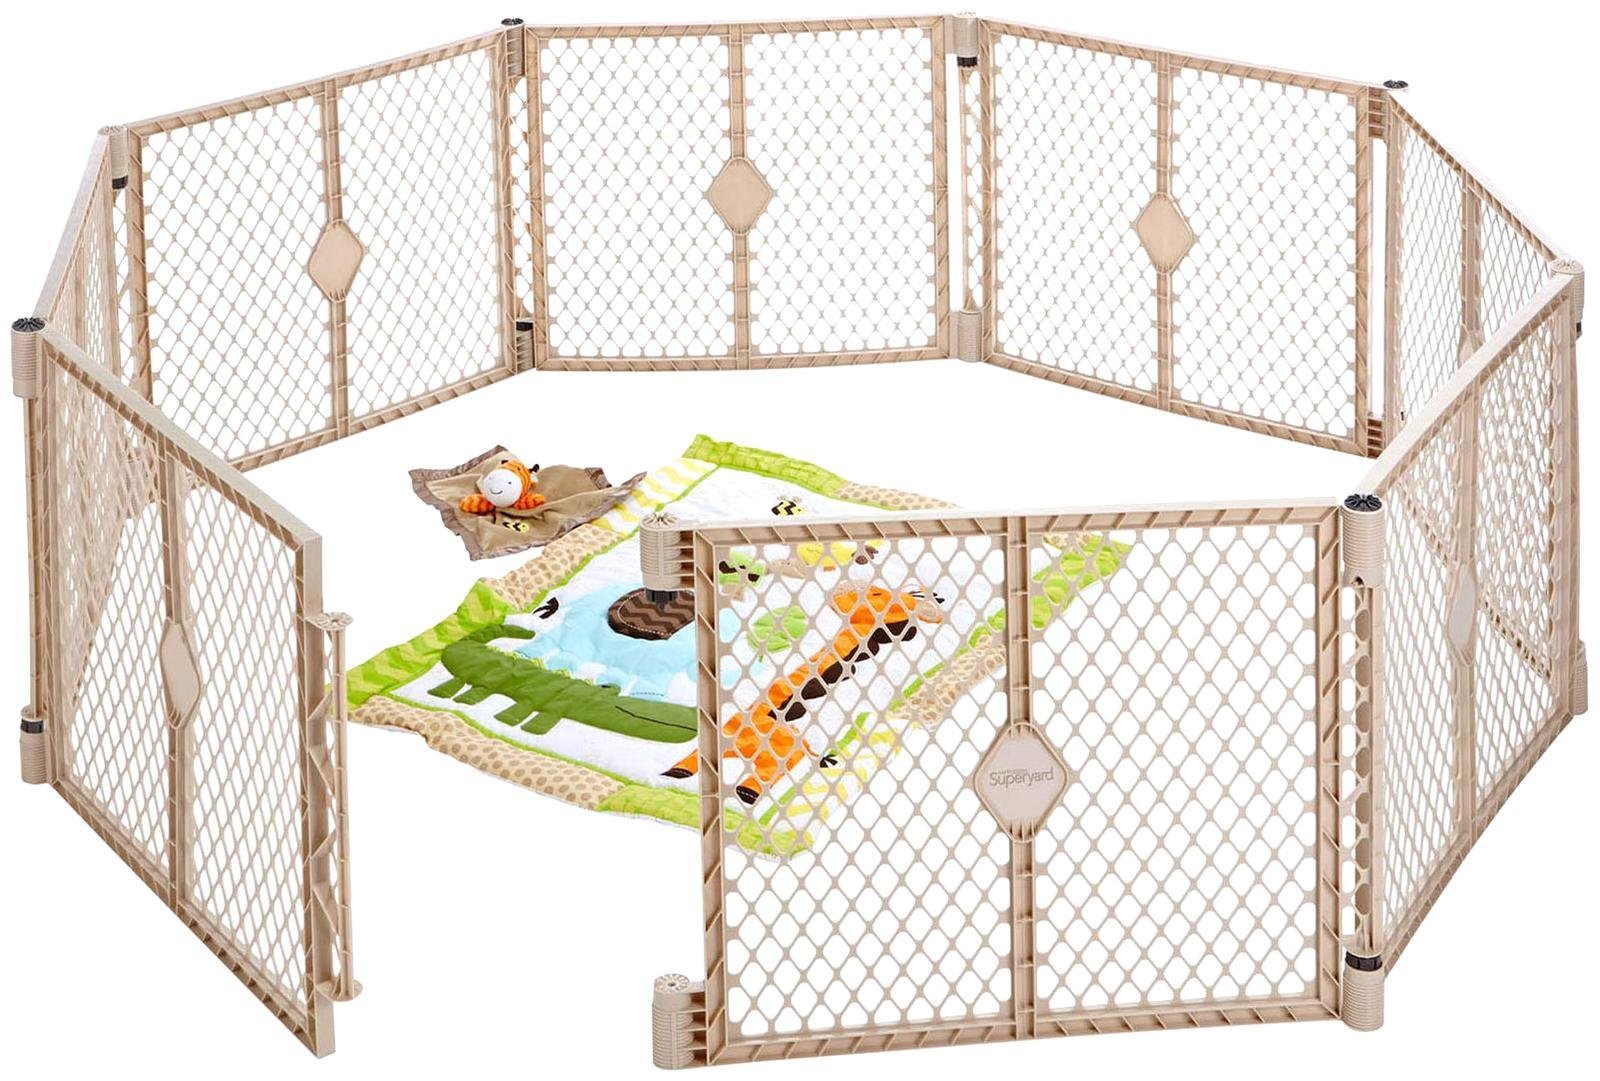 Toddleroo by North States Superyard Indoor/Outdoor 8-Panel Play Baby Yard, Made in USA: Safe play area anywhere. Freestanding. 18.5 sq. ft. enclosure or 6.5 ft. corner to corner (26